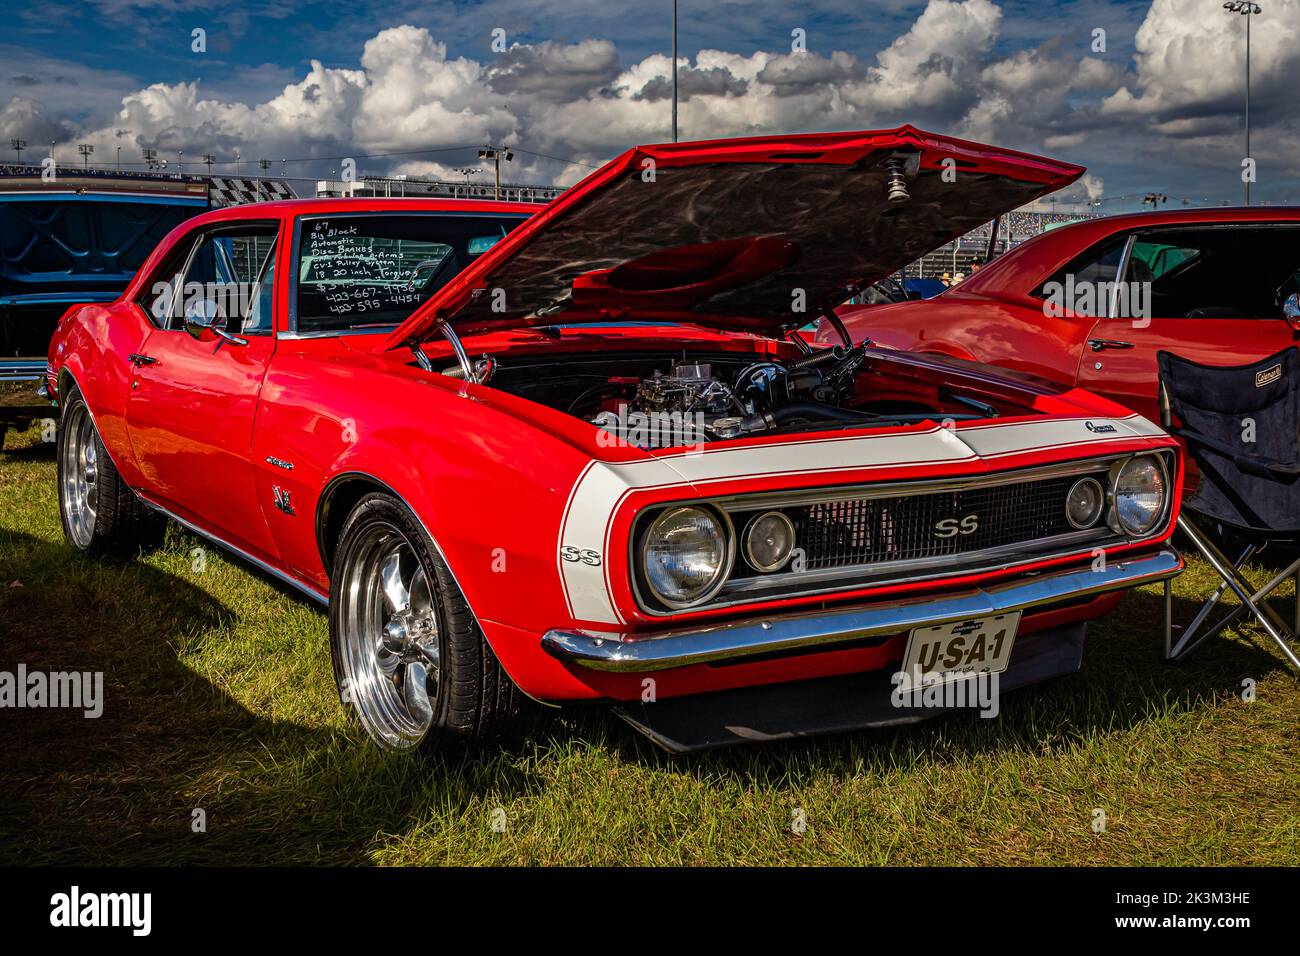 Daytona Beach, FL - November 28, 2020: Low perspective front corner view of a 1967 Chevrolet Camaro SS Hardtop Coupe at a local car show. Stock Photo